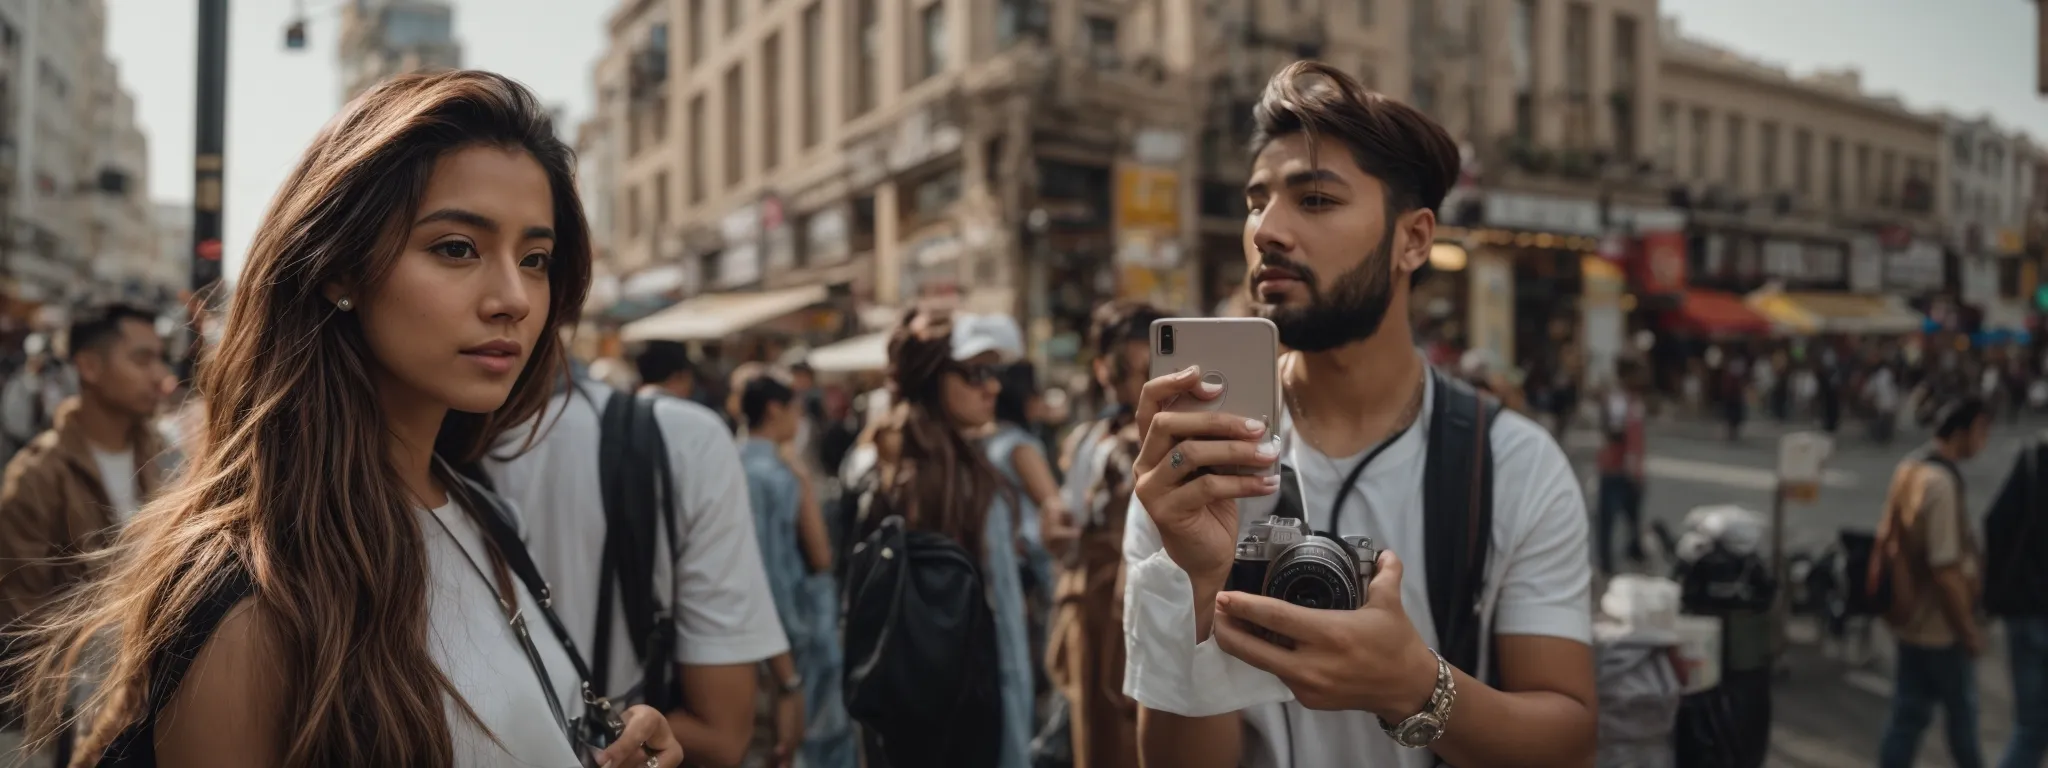 an influencer captures a selfie with a product amidst a bustling urban setting, highlighting the symbiotic relationship of brand promotion.